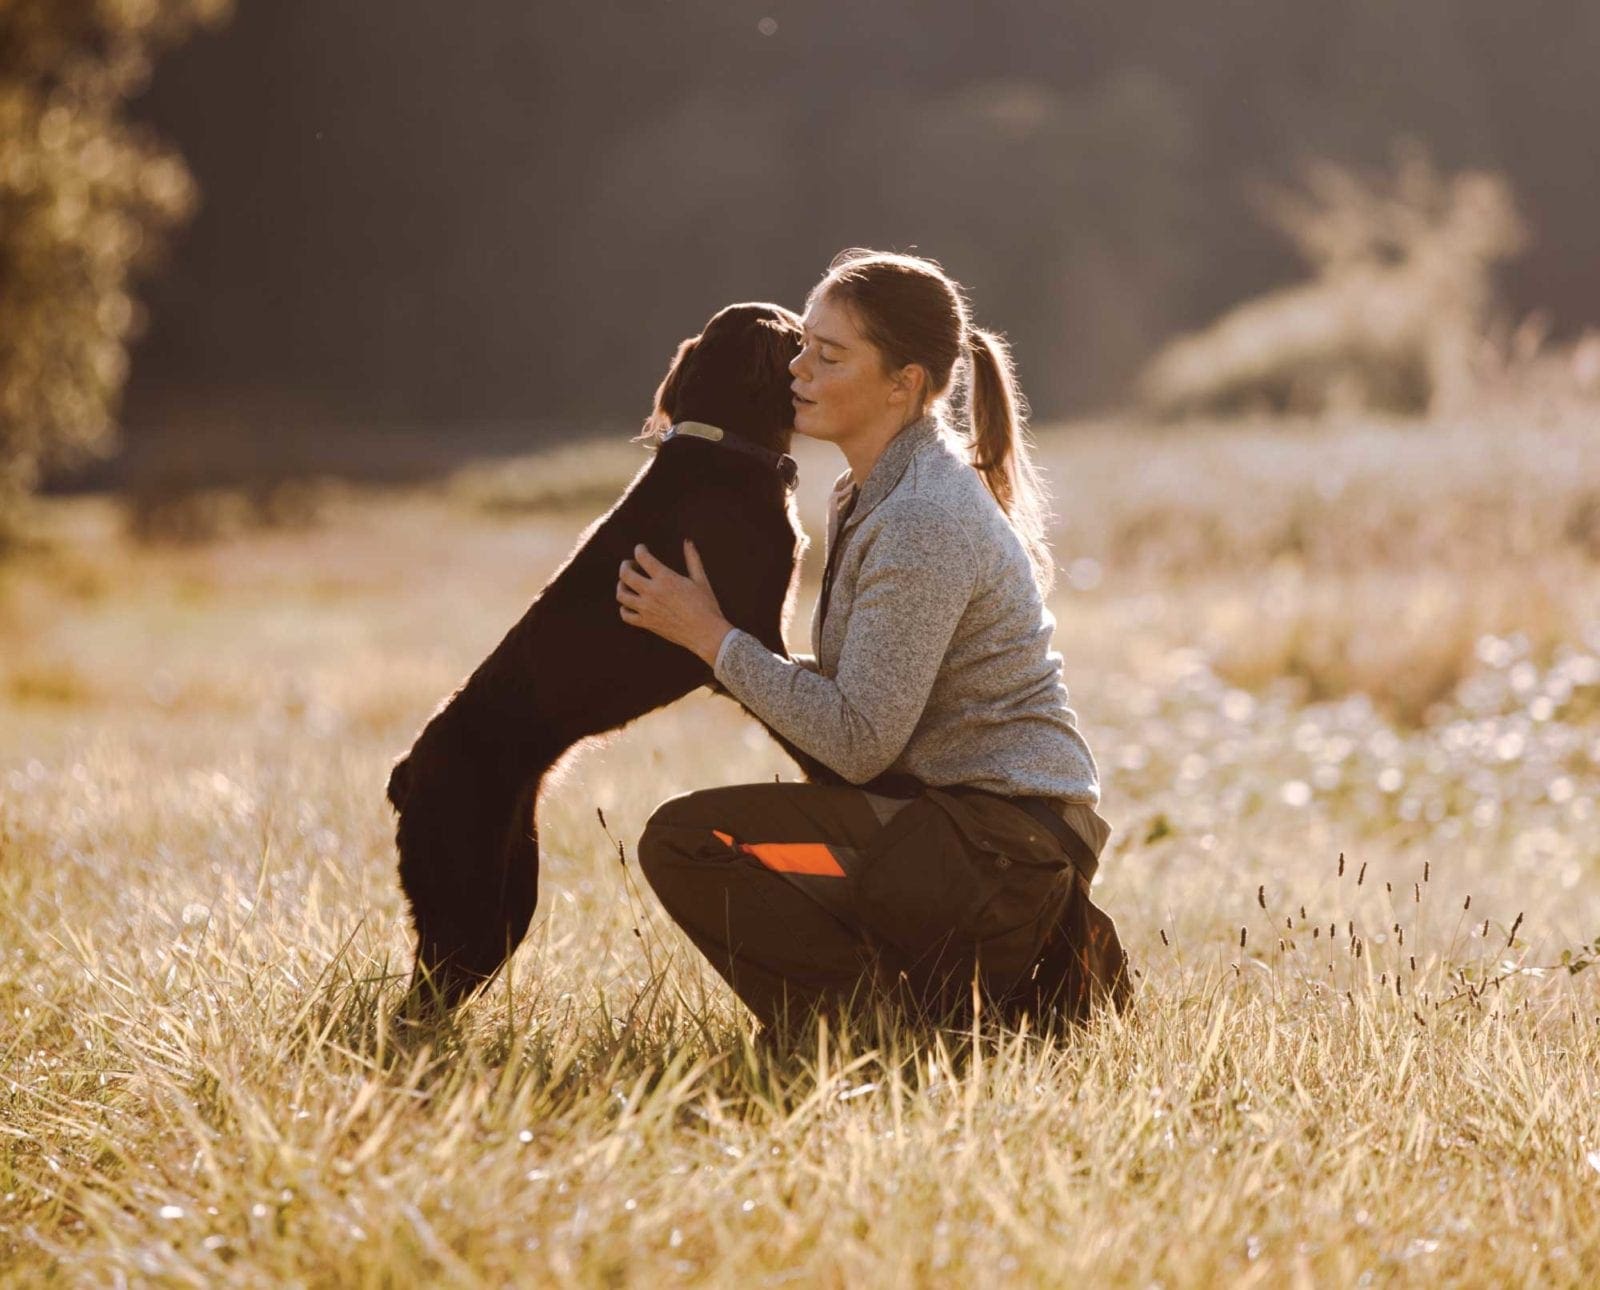 A woman training her first bird dog in a field.